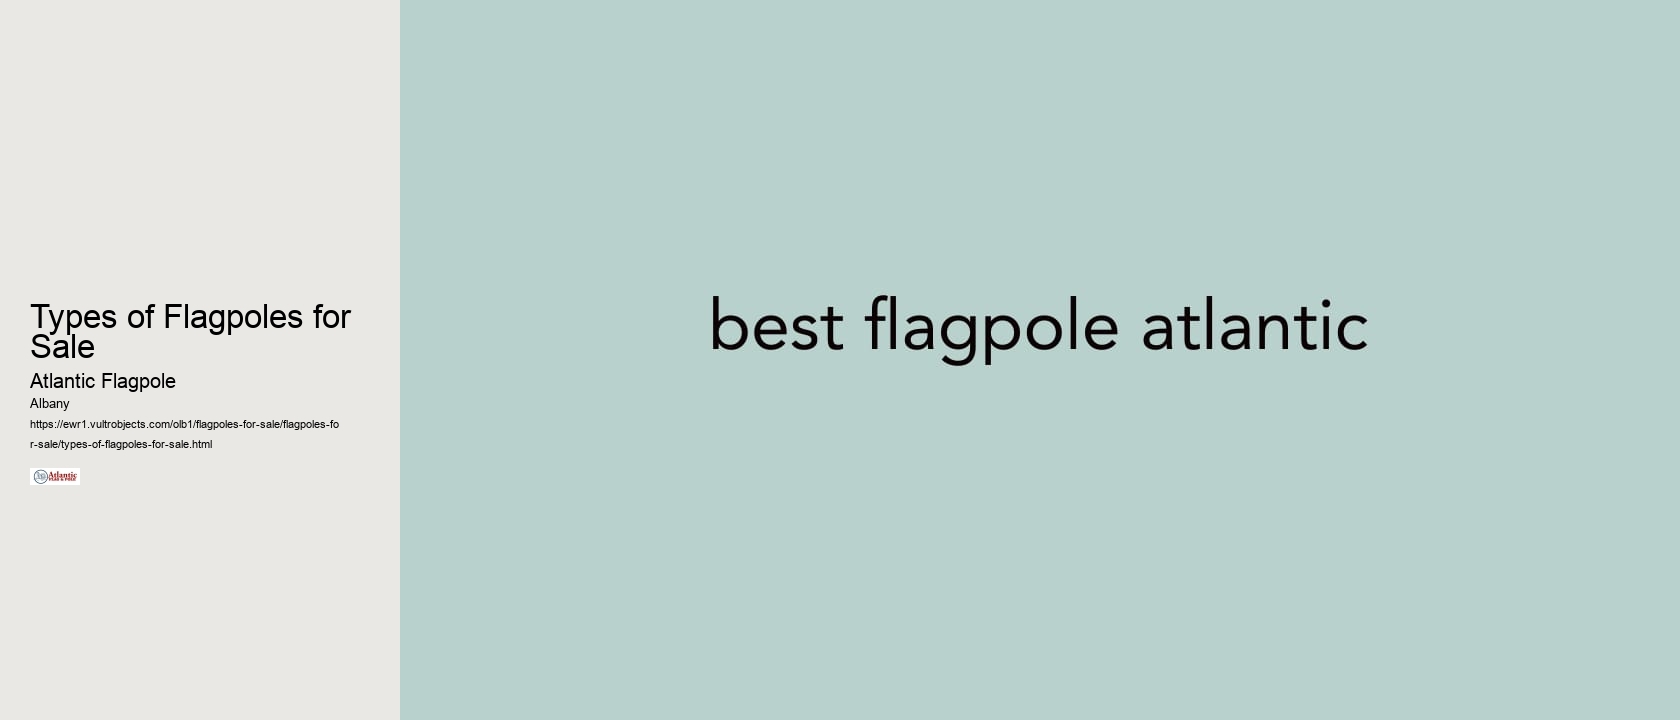 Types of Flagpoles for Sale